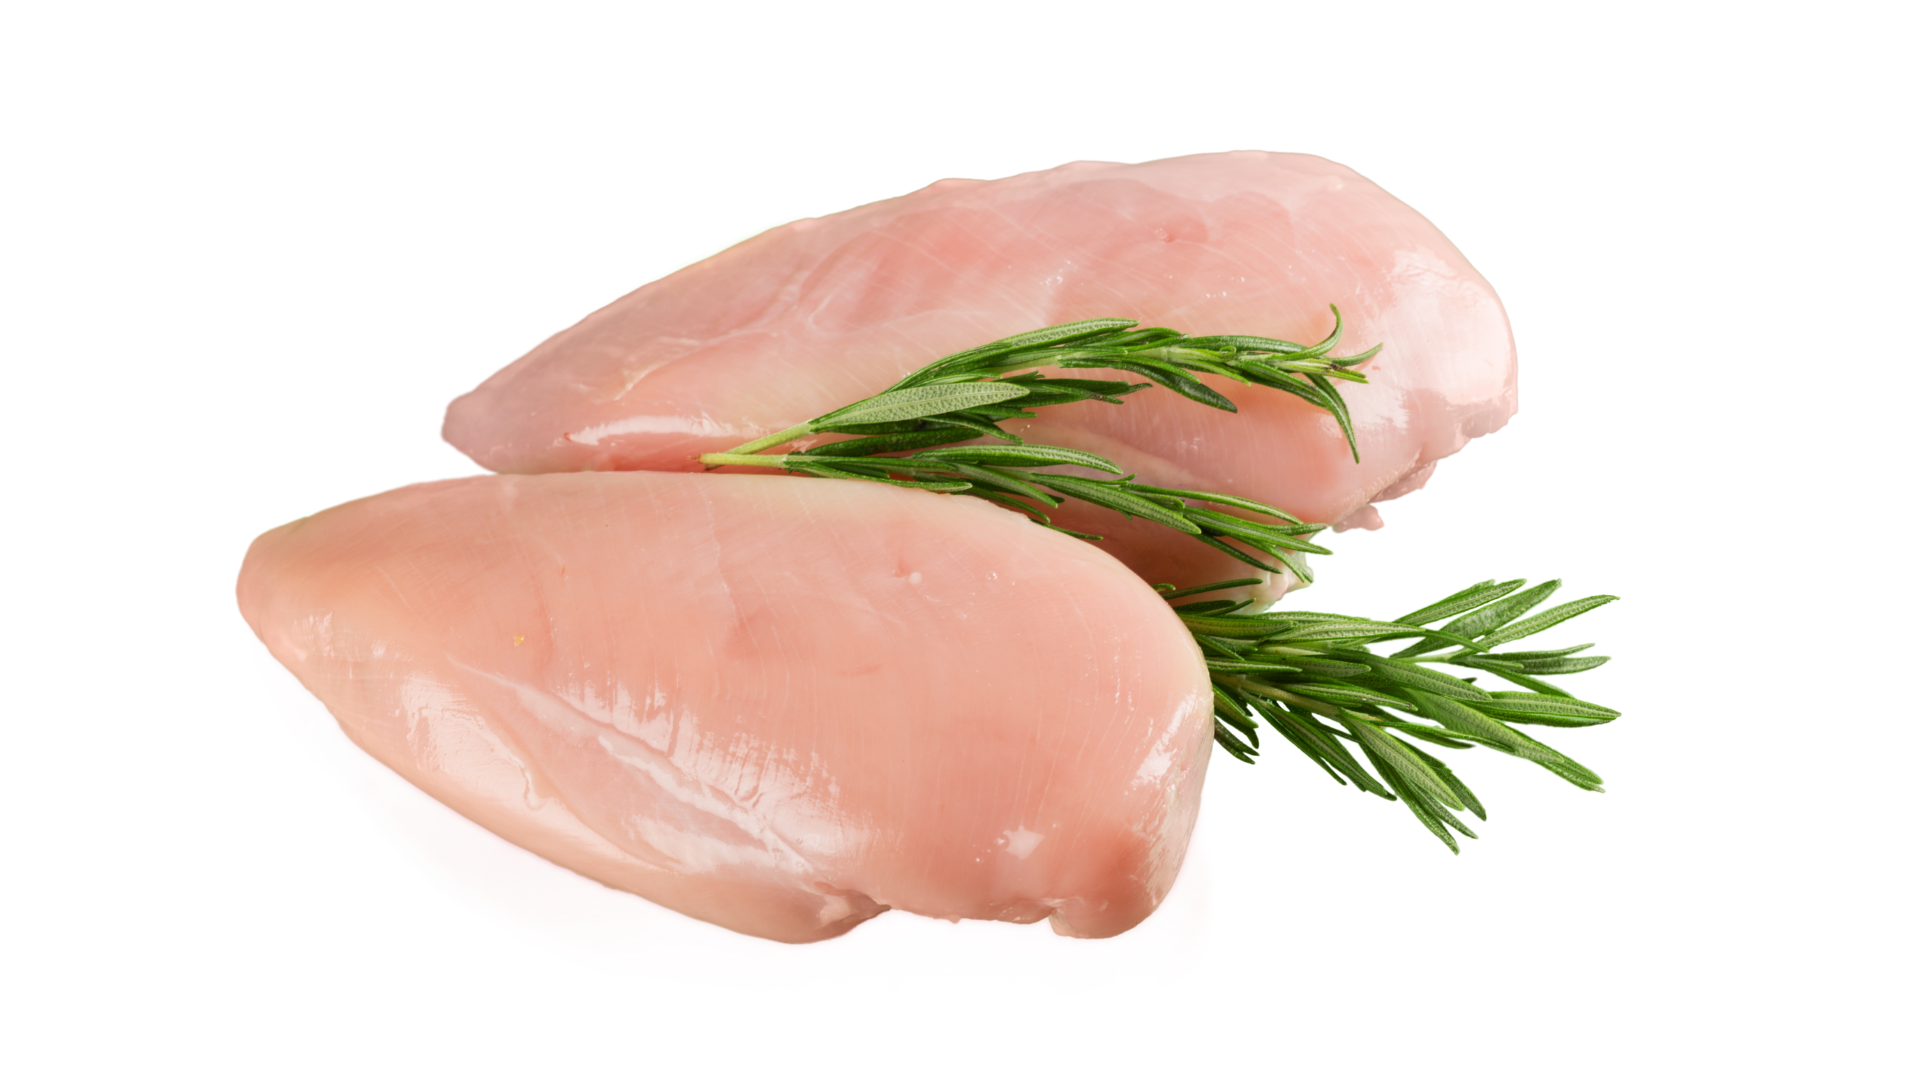 how to boil chicken for dogs, dog boiled chicken, skinless chicken breasts, chicken breasts, boil chicken, cooked chicken, boil chicken for dogs, chicken for dogs, boneless chicken breasts, chicken thighs, dog chicken, eating chicken, frozen chicken, raw chicken